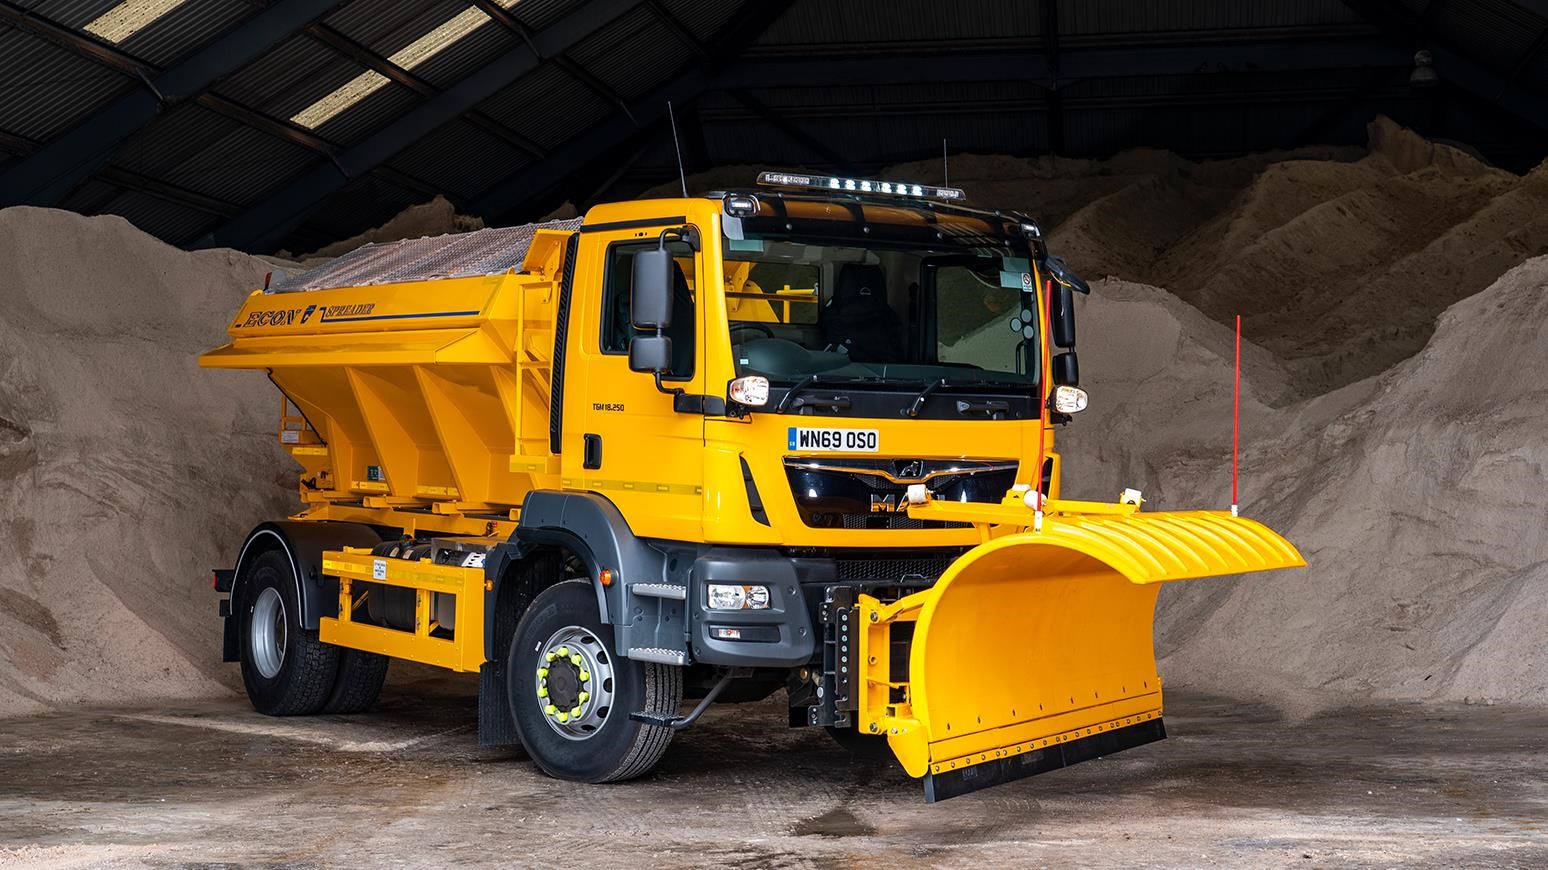 Manufacturer & Contract Hire Business Trials New MAN TGM 18.250 4X4 Gritter Truck In London Borough